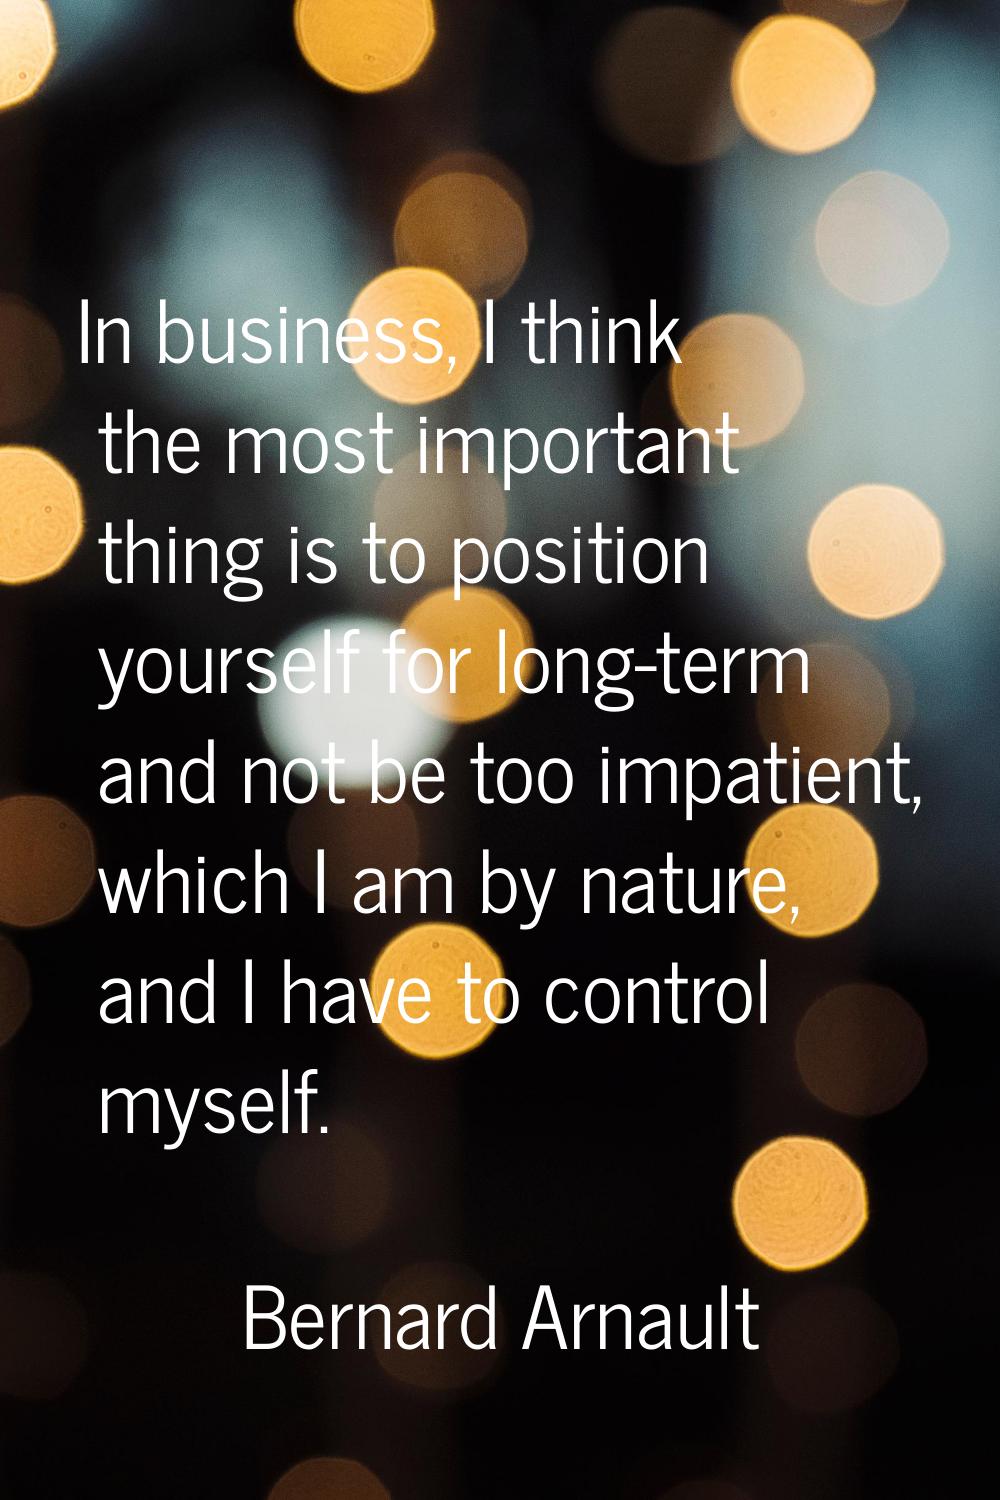 In business, I think the most important thing is to position yourself for long-term and not be too 